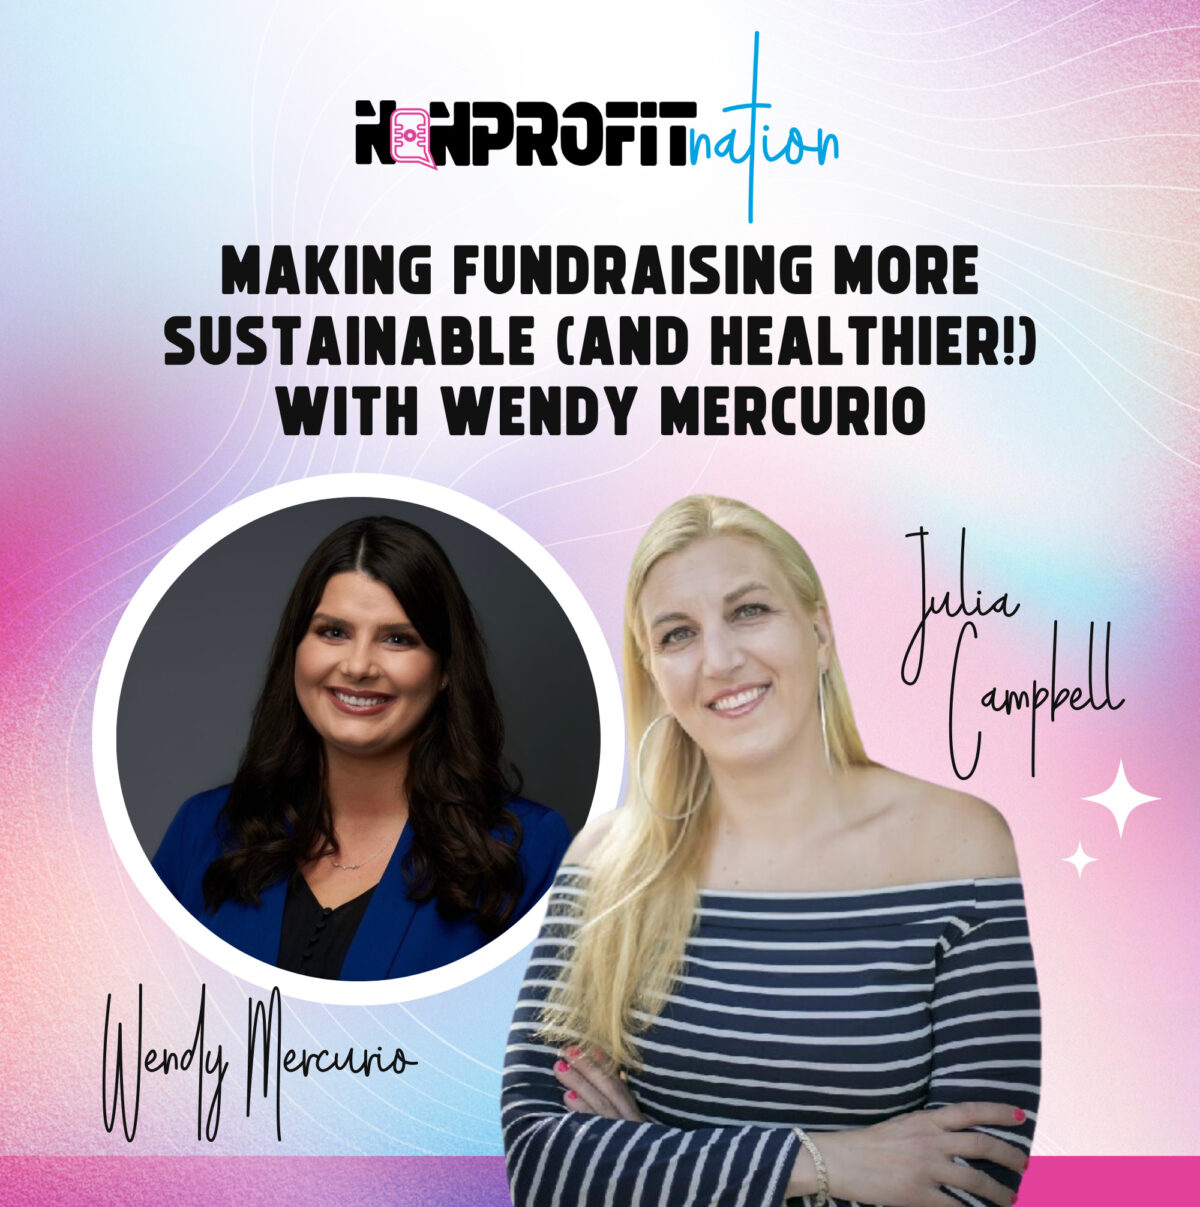 The Problem With "Doing More With Less" - Building Sustainable Fundraising Programs with Wendy Mercurio